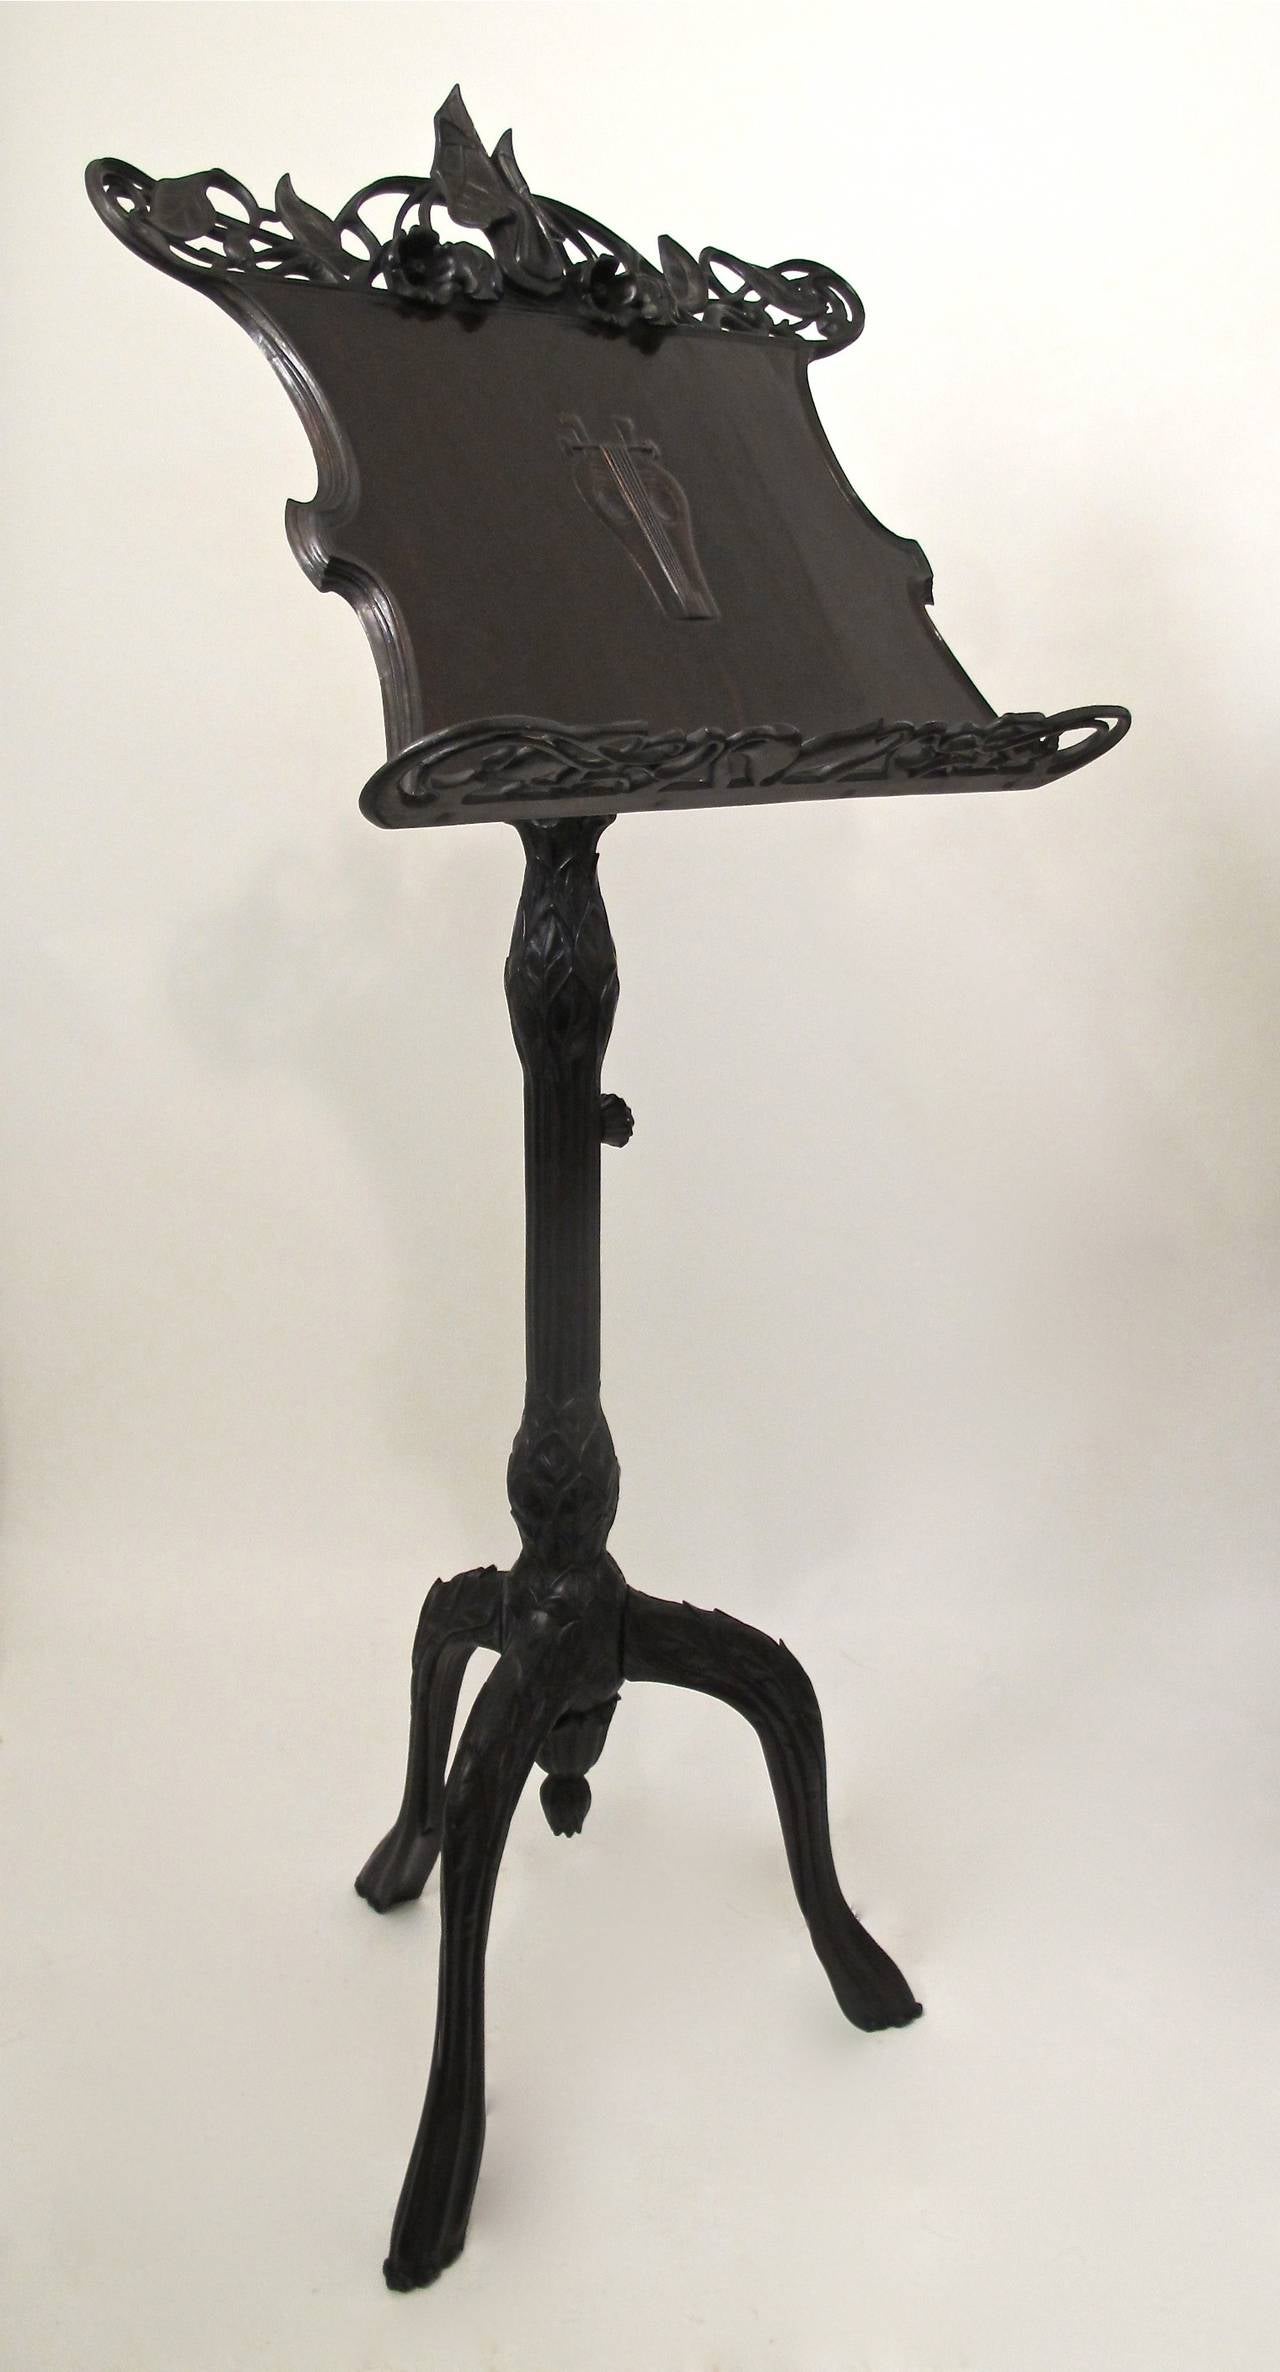 Outstanding hand-carved music stand with wonderful detailing of scrolling vines with leaves and flowers through out the entire piece. Beautifully carved flower head knobs on the sheet music tilting rest and height adjuster, fully carved center pole